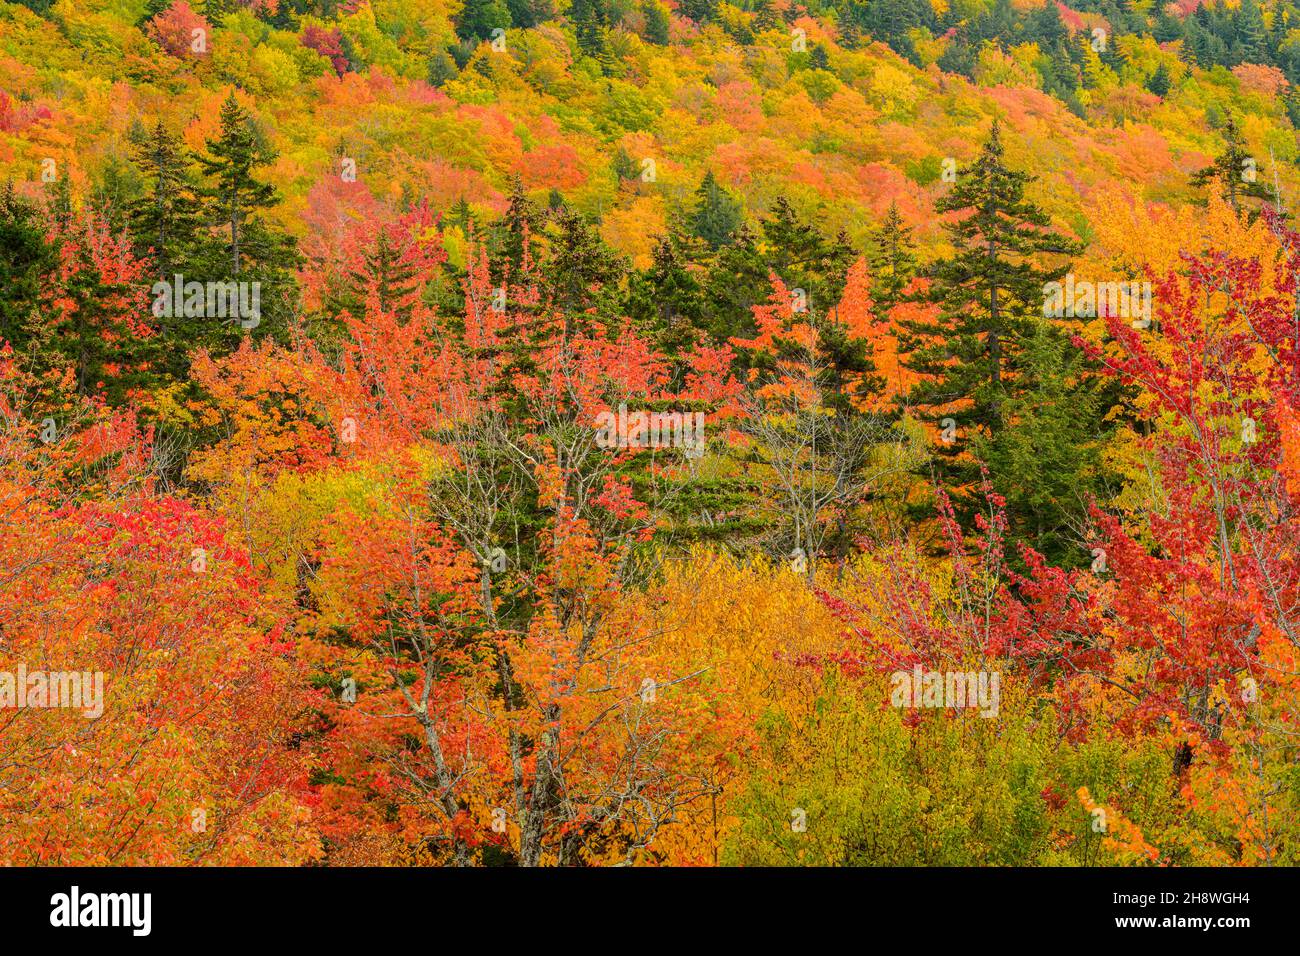 Autumn foliage in the deciduous forest on New England hillsides, Bear Notch Road, New Hampshire, USA Stock Photo